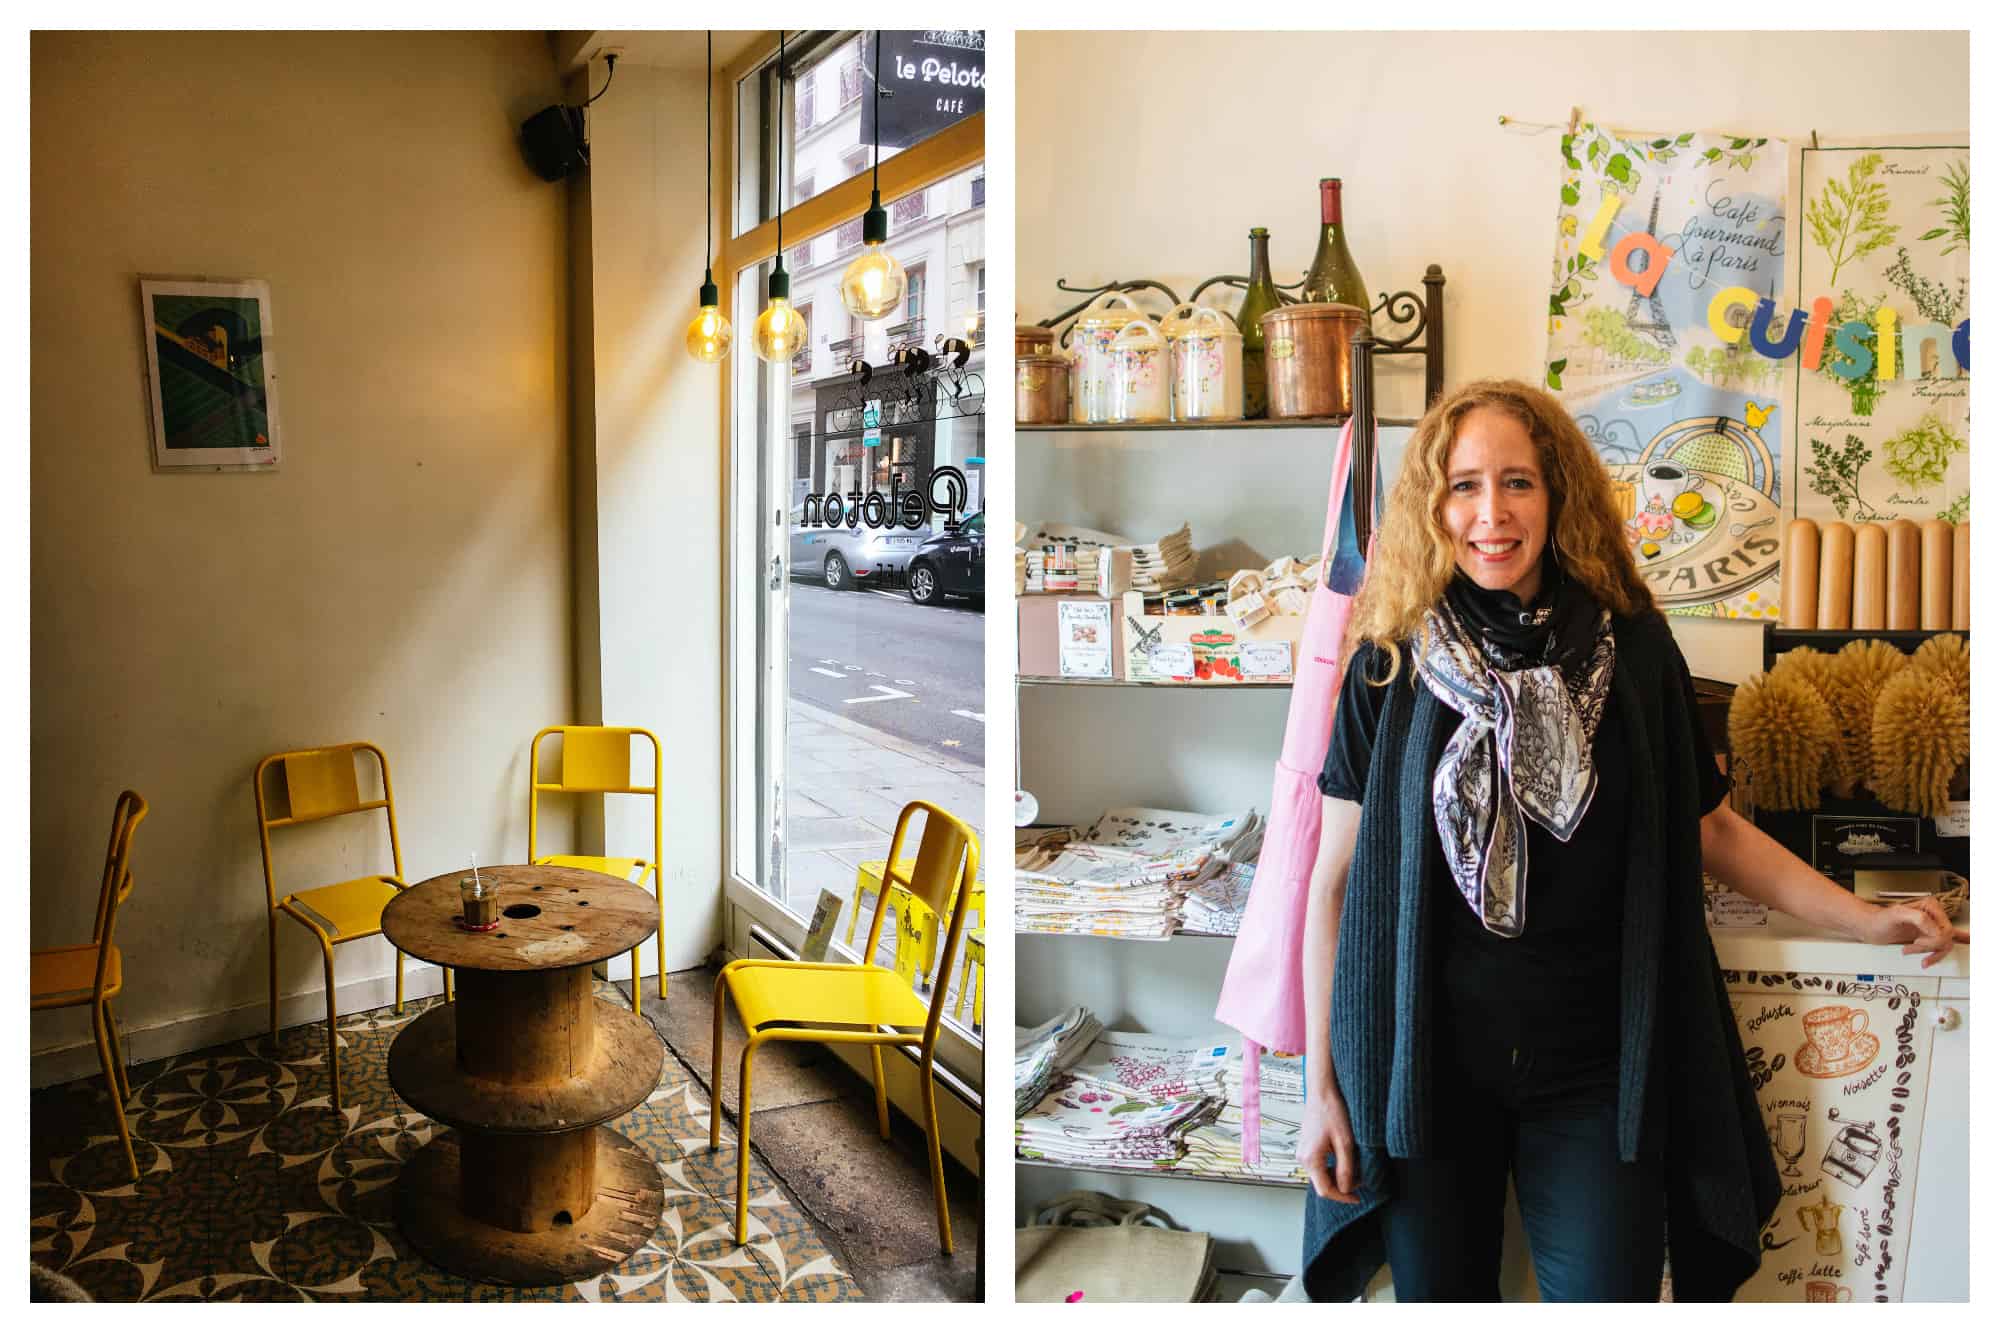 On left: Cheerful yellow metal chairs await the morning coffee crowd at Le Peloton, a popular coffee shop in Le Marais. On right: Jane Bertch smiles in the kitchen of La Cuisine Paris, the cooking school she founded, located on the Seine River. 